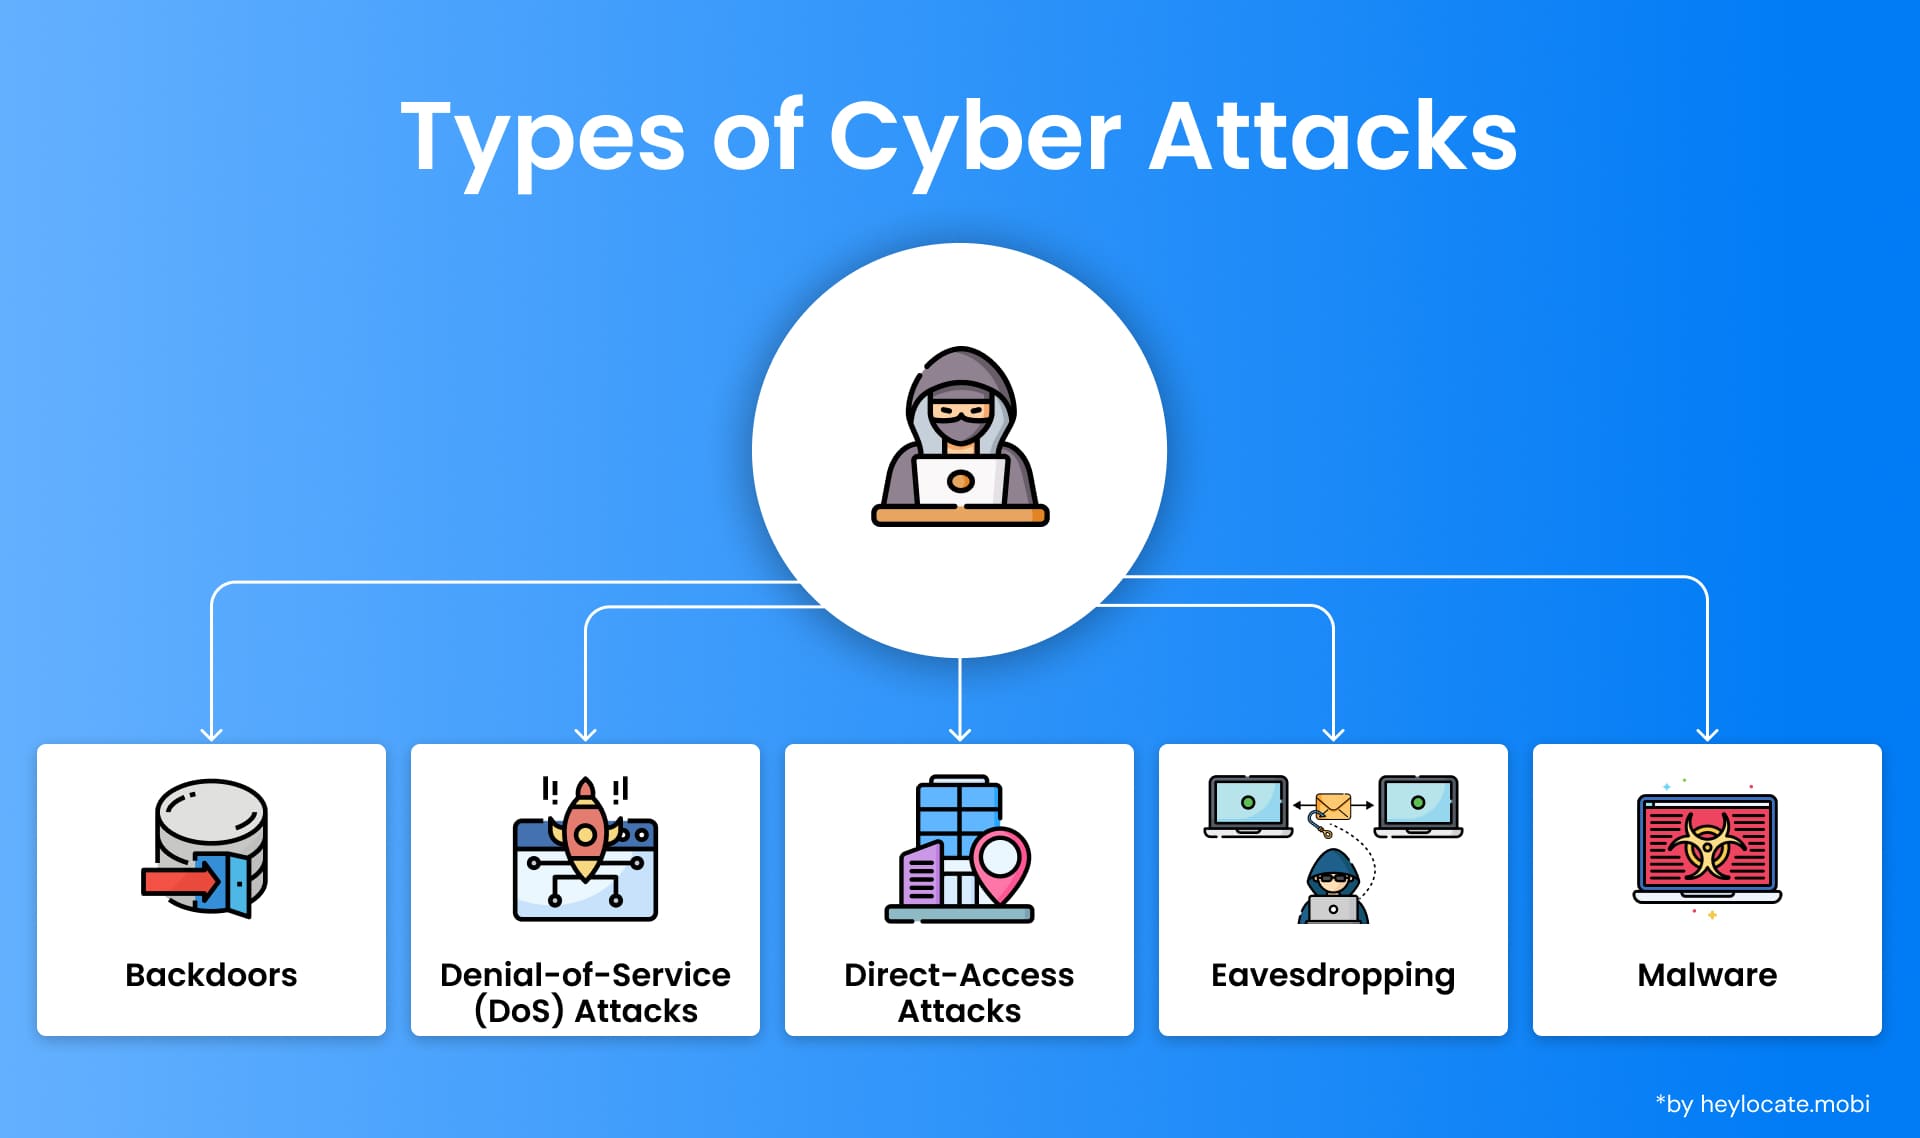 Infographic displaying different types of cyber attacks: Backdoors, Denial-of-Service (DoS) Attacks, Direct-Access Attacks, Eavesdropping, and Malware, each illustrated with a corresponding symbol